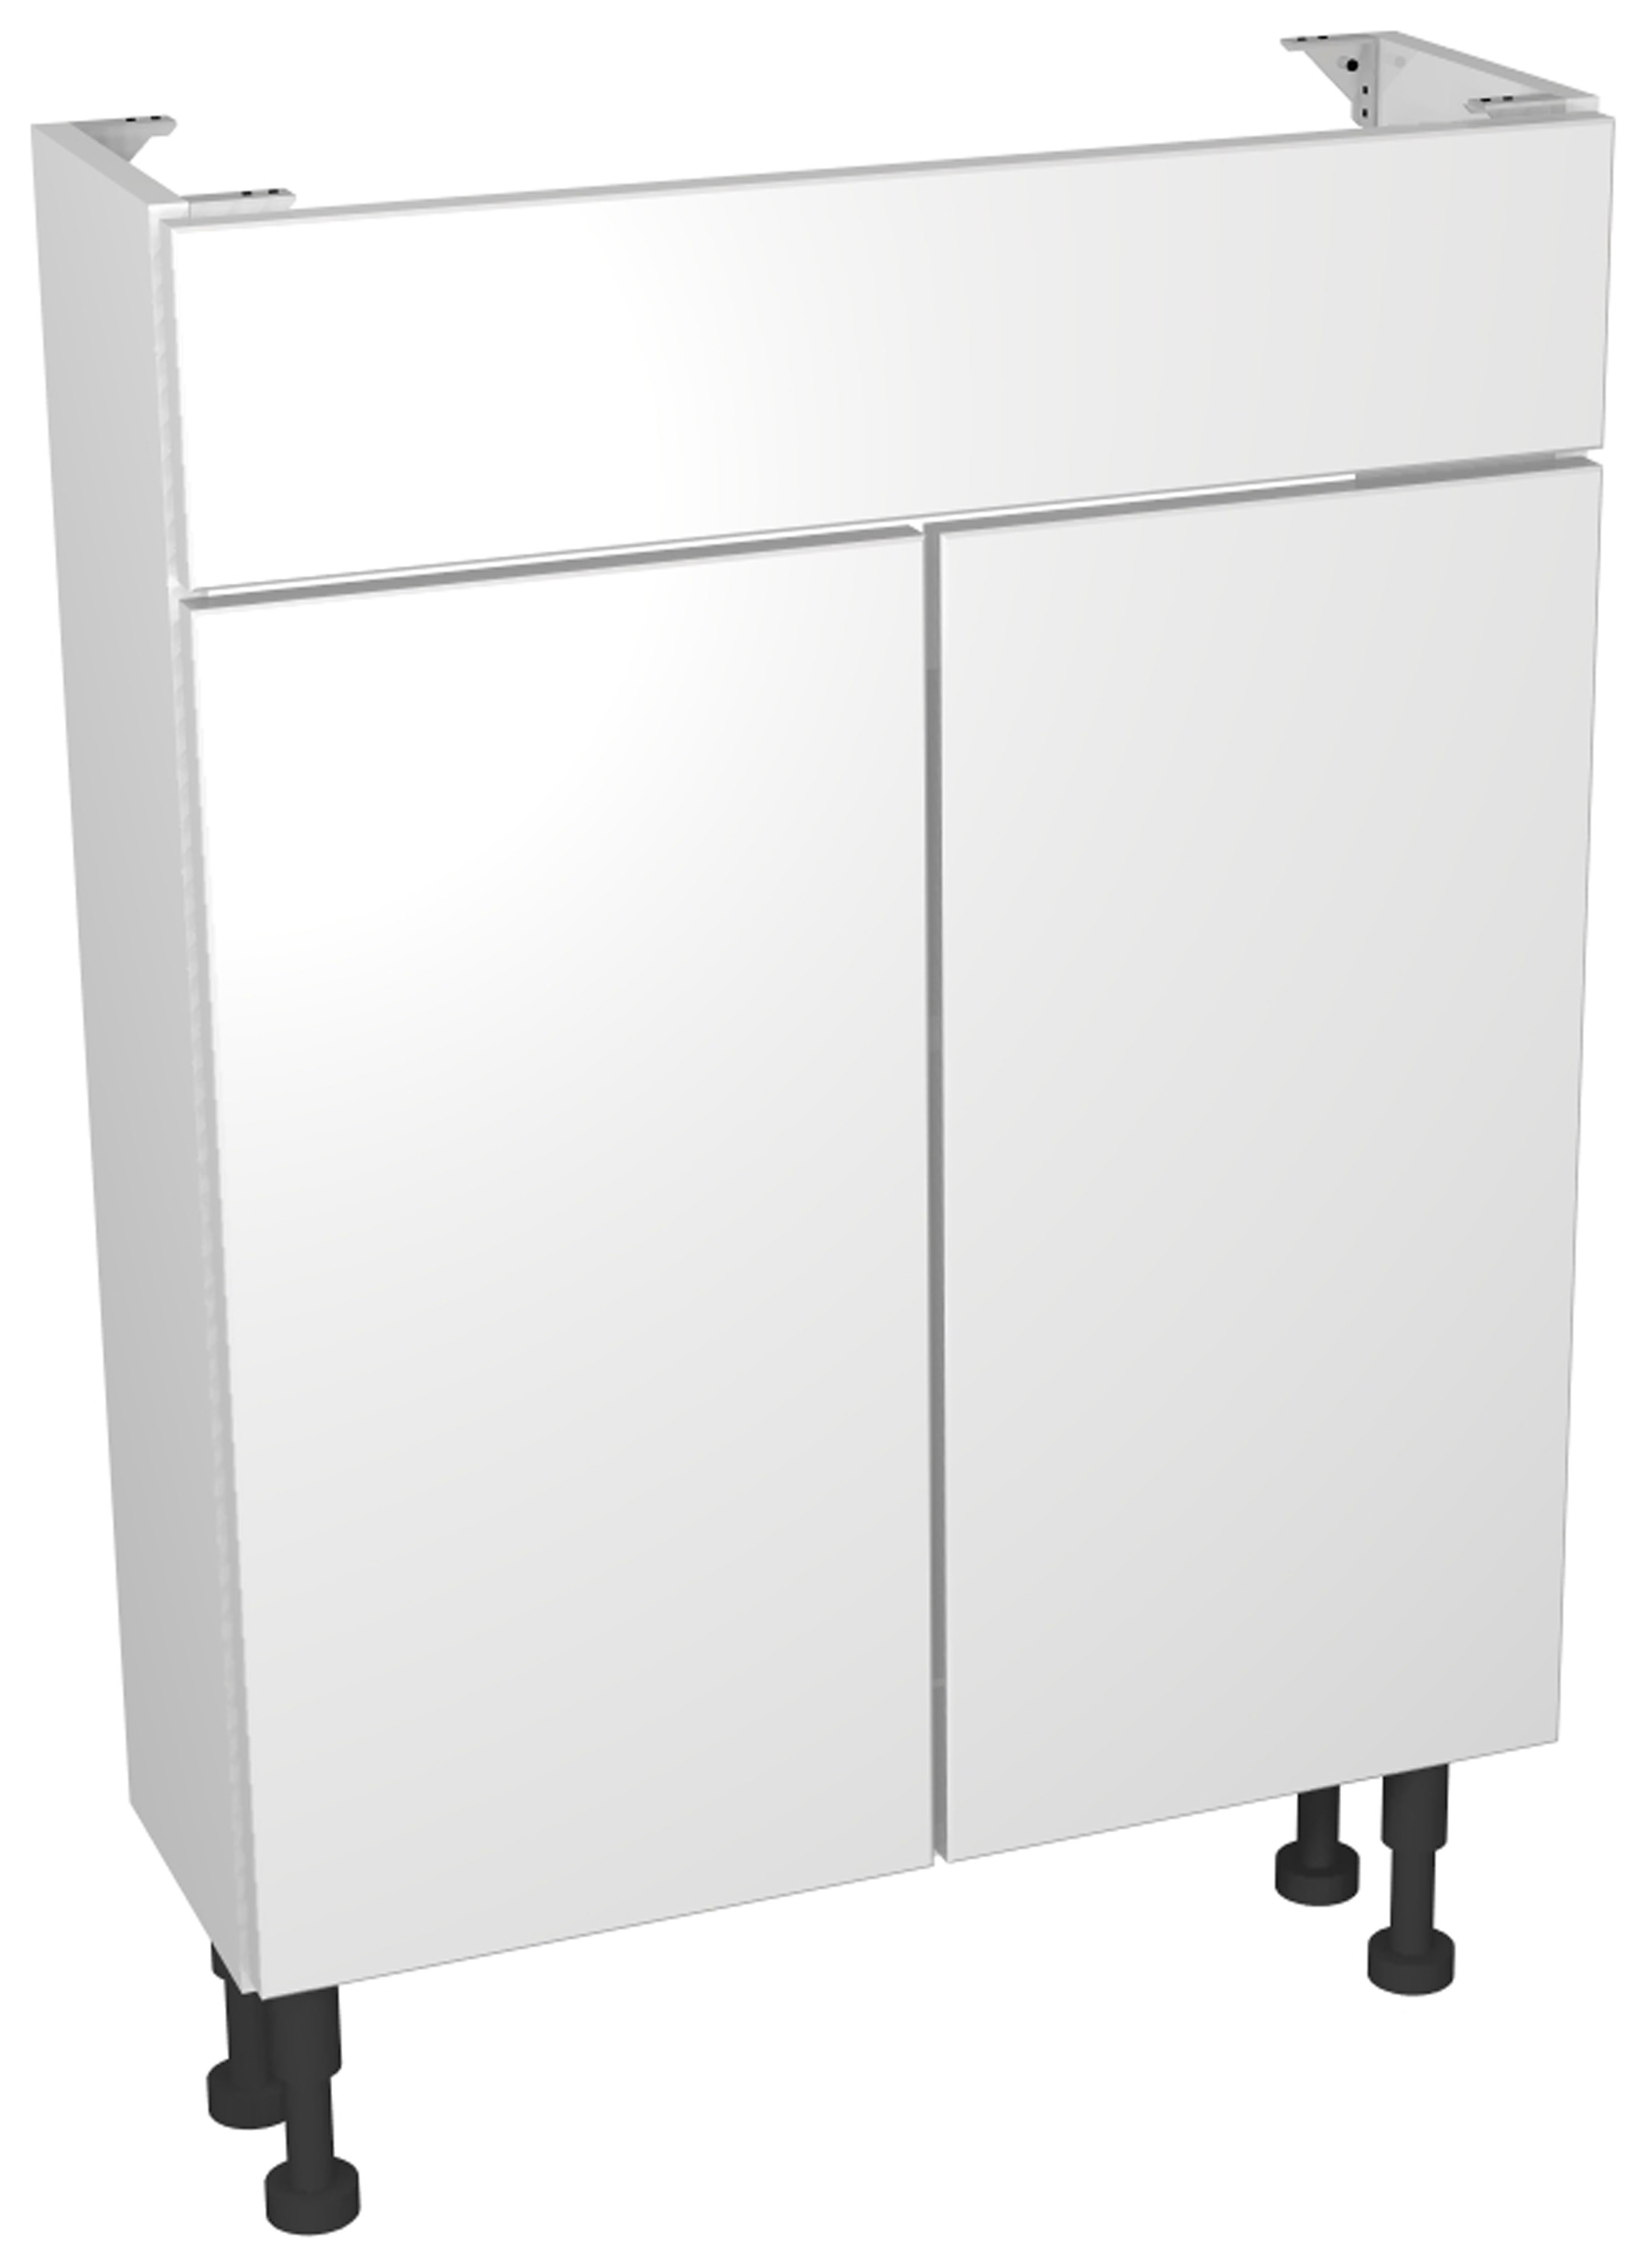 Image of Wickes Vienna Modern Compact Vanity Unit, in White, Size: 600x735mm